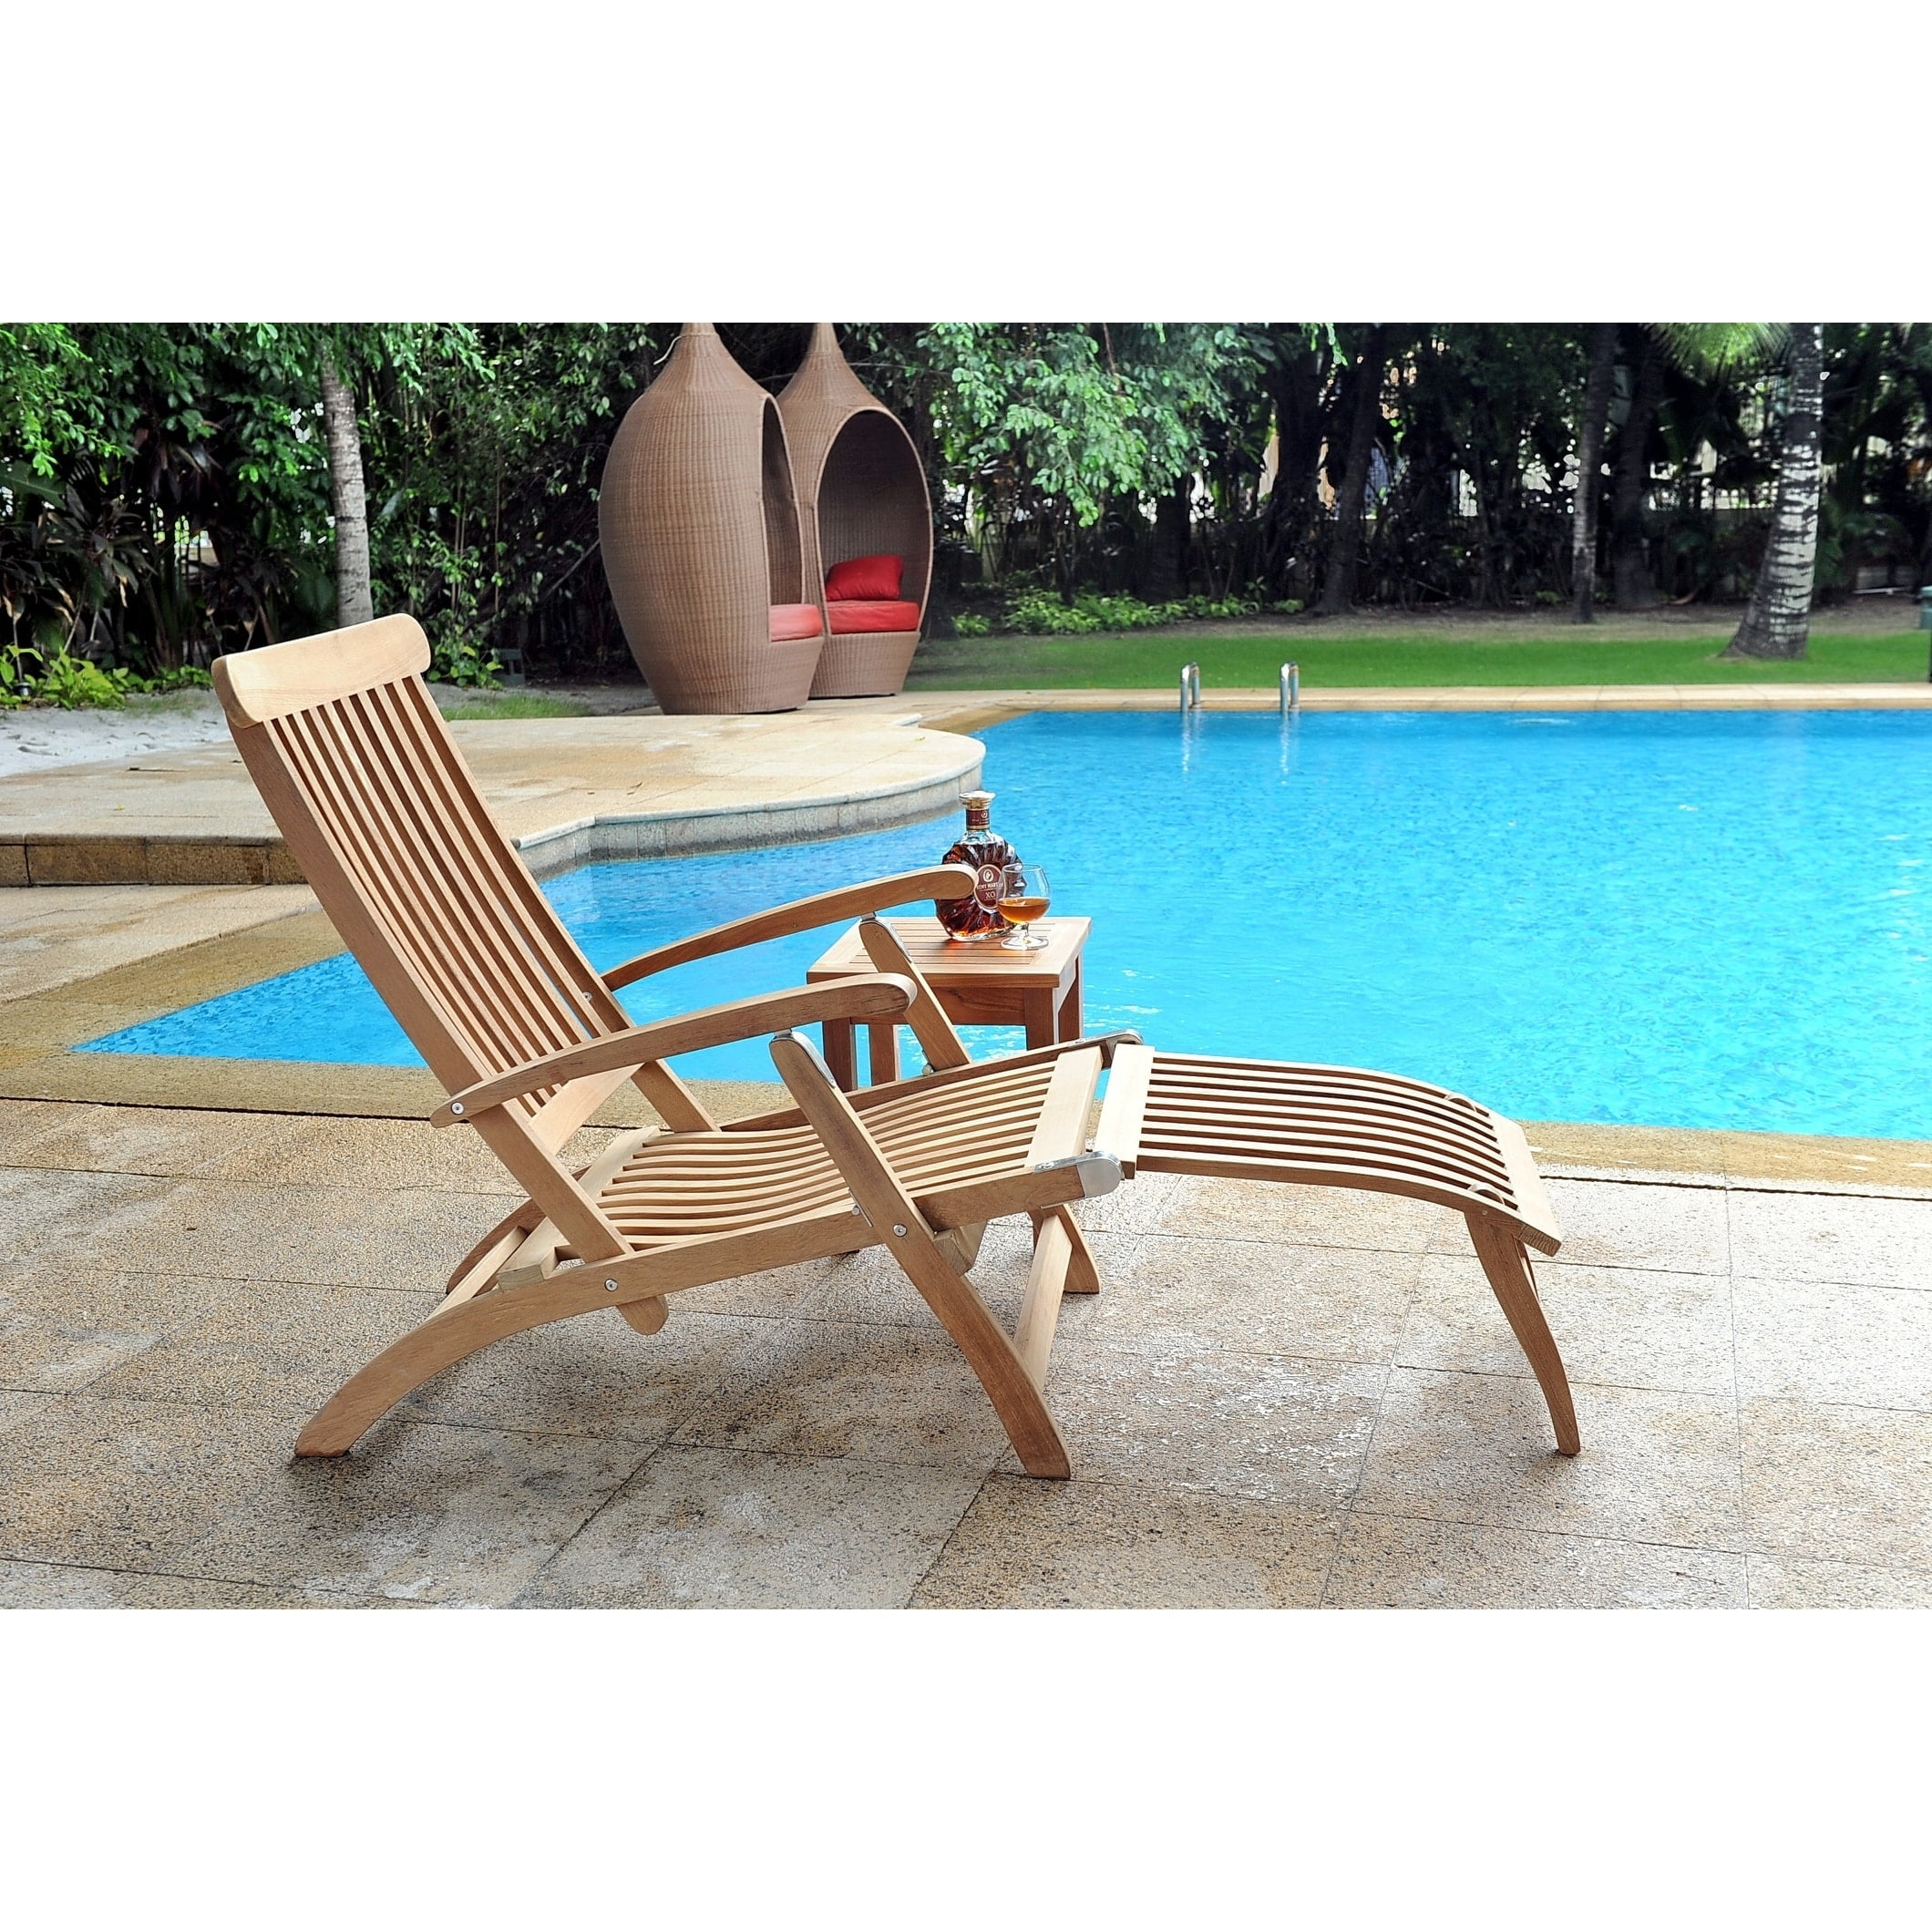 Teak Outdoor Patio Furniture With Swivel Chairs